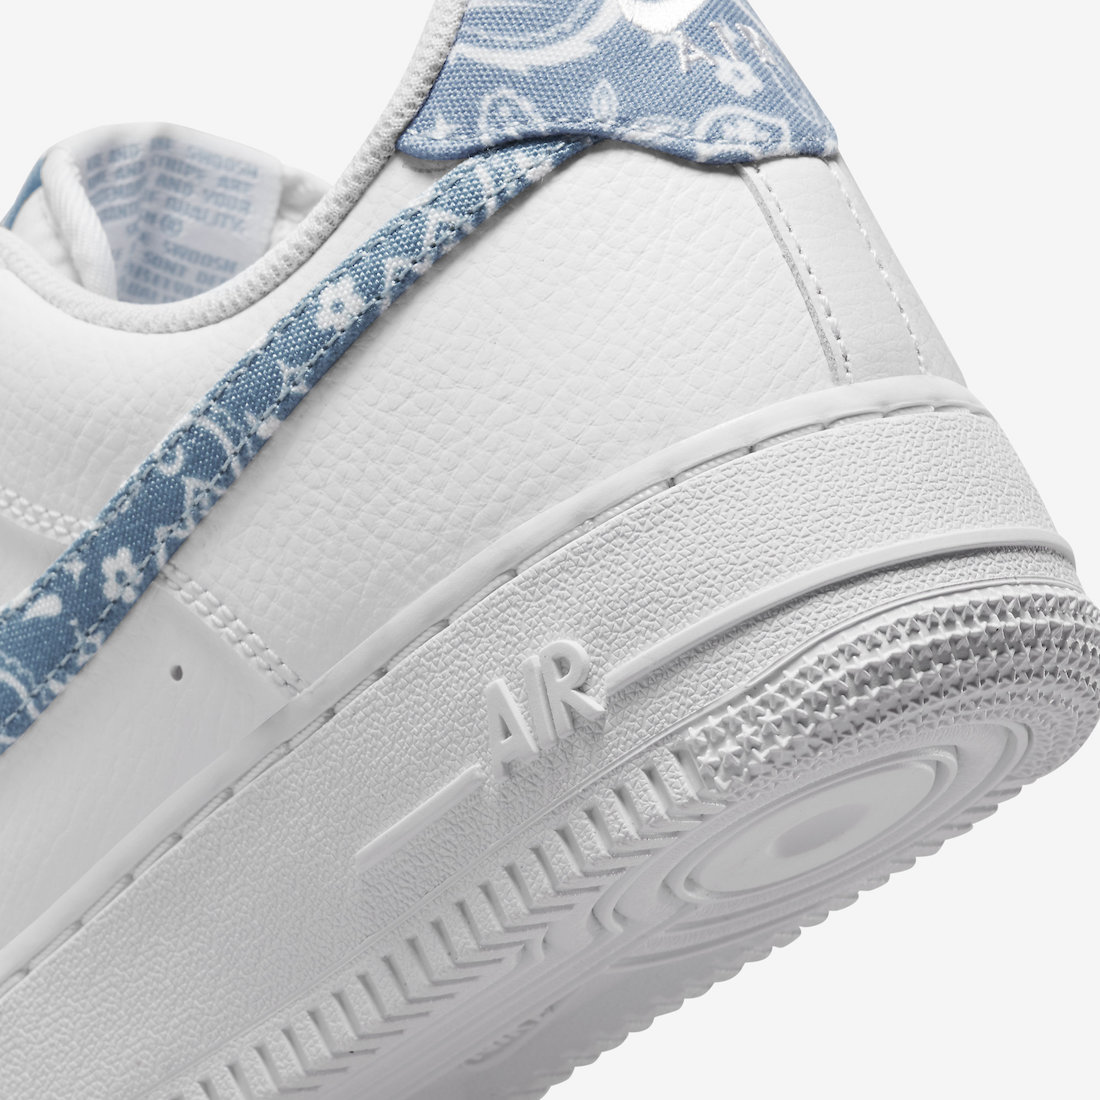 Nike Air Force 1 White Worn Blue Paisley DH4406-100 Release Date